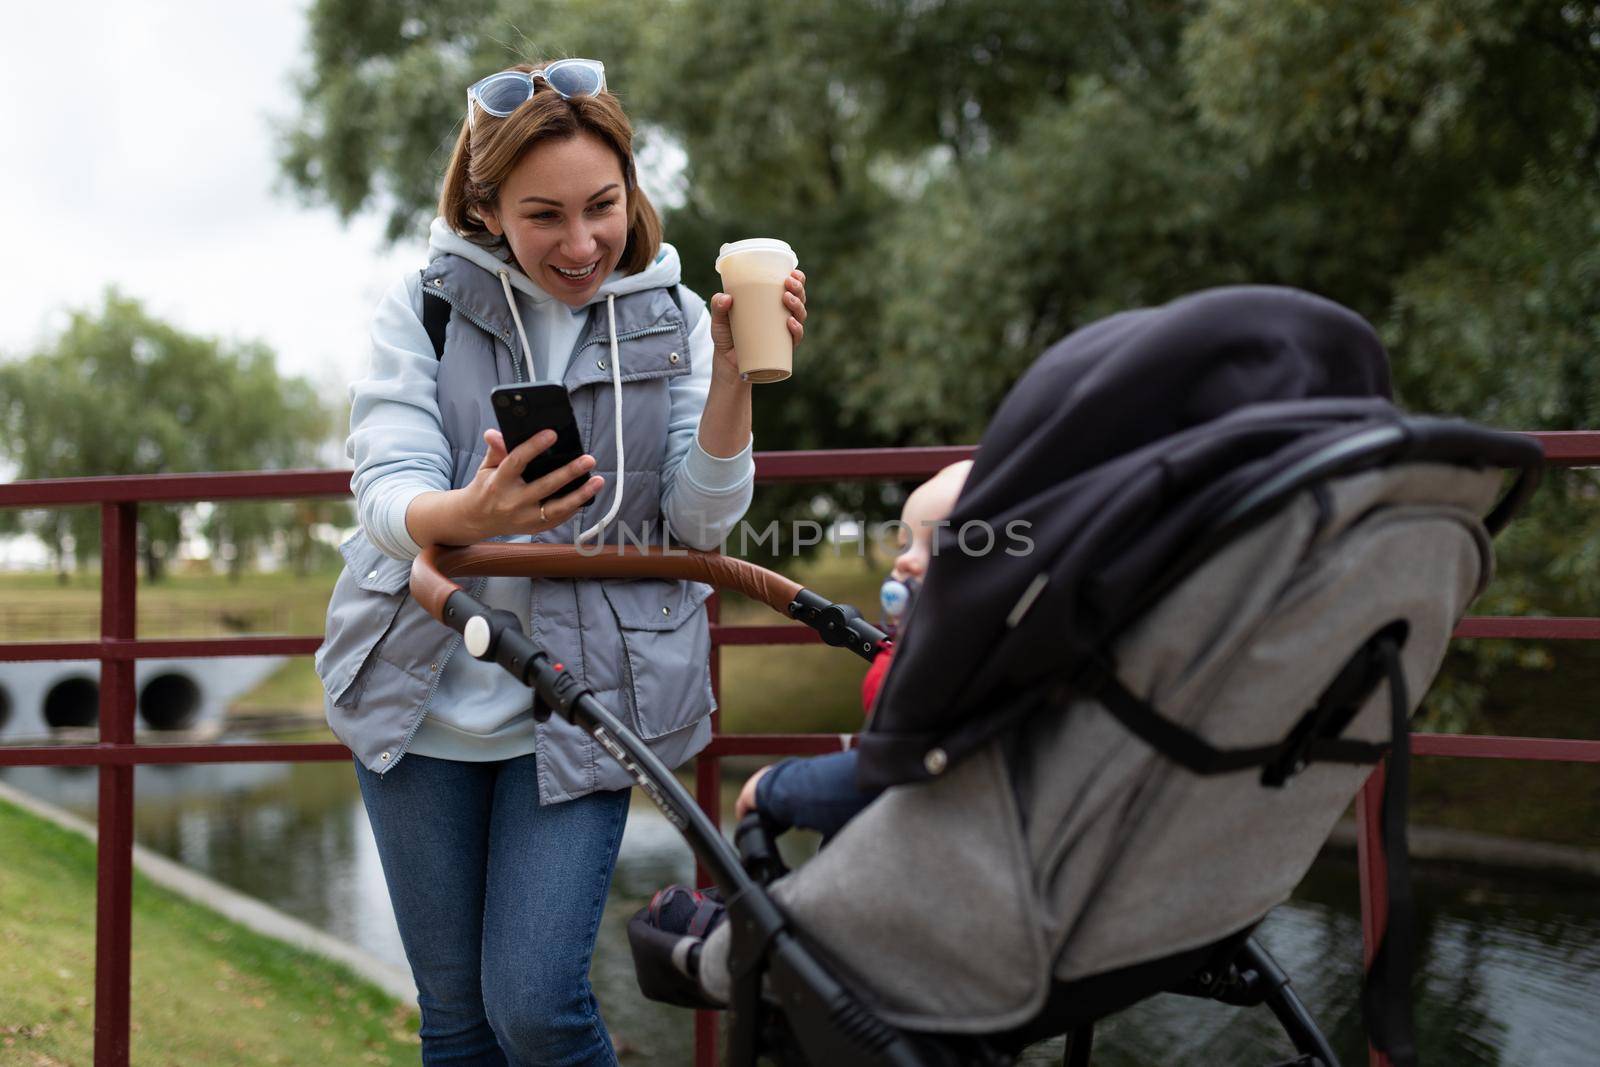 a young mother sipping coffee in headphones walks in the park with a baby stroller.